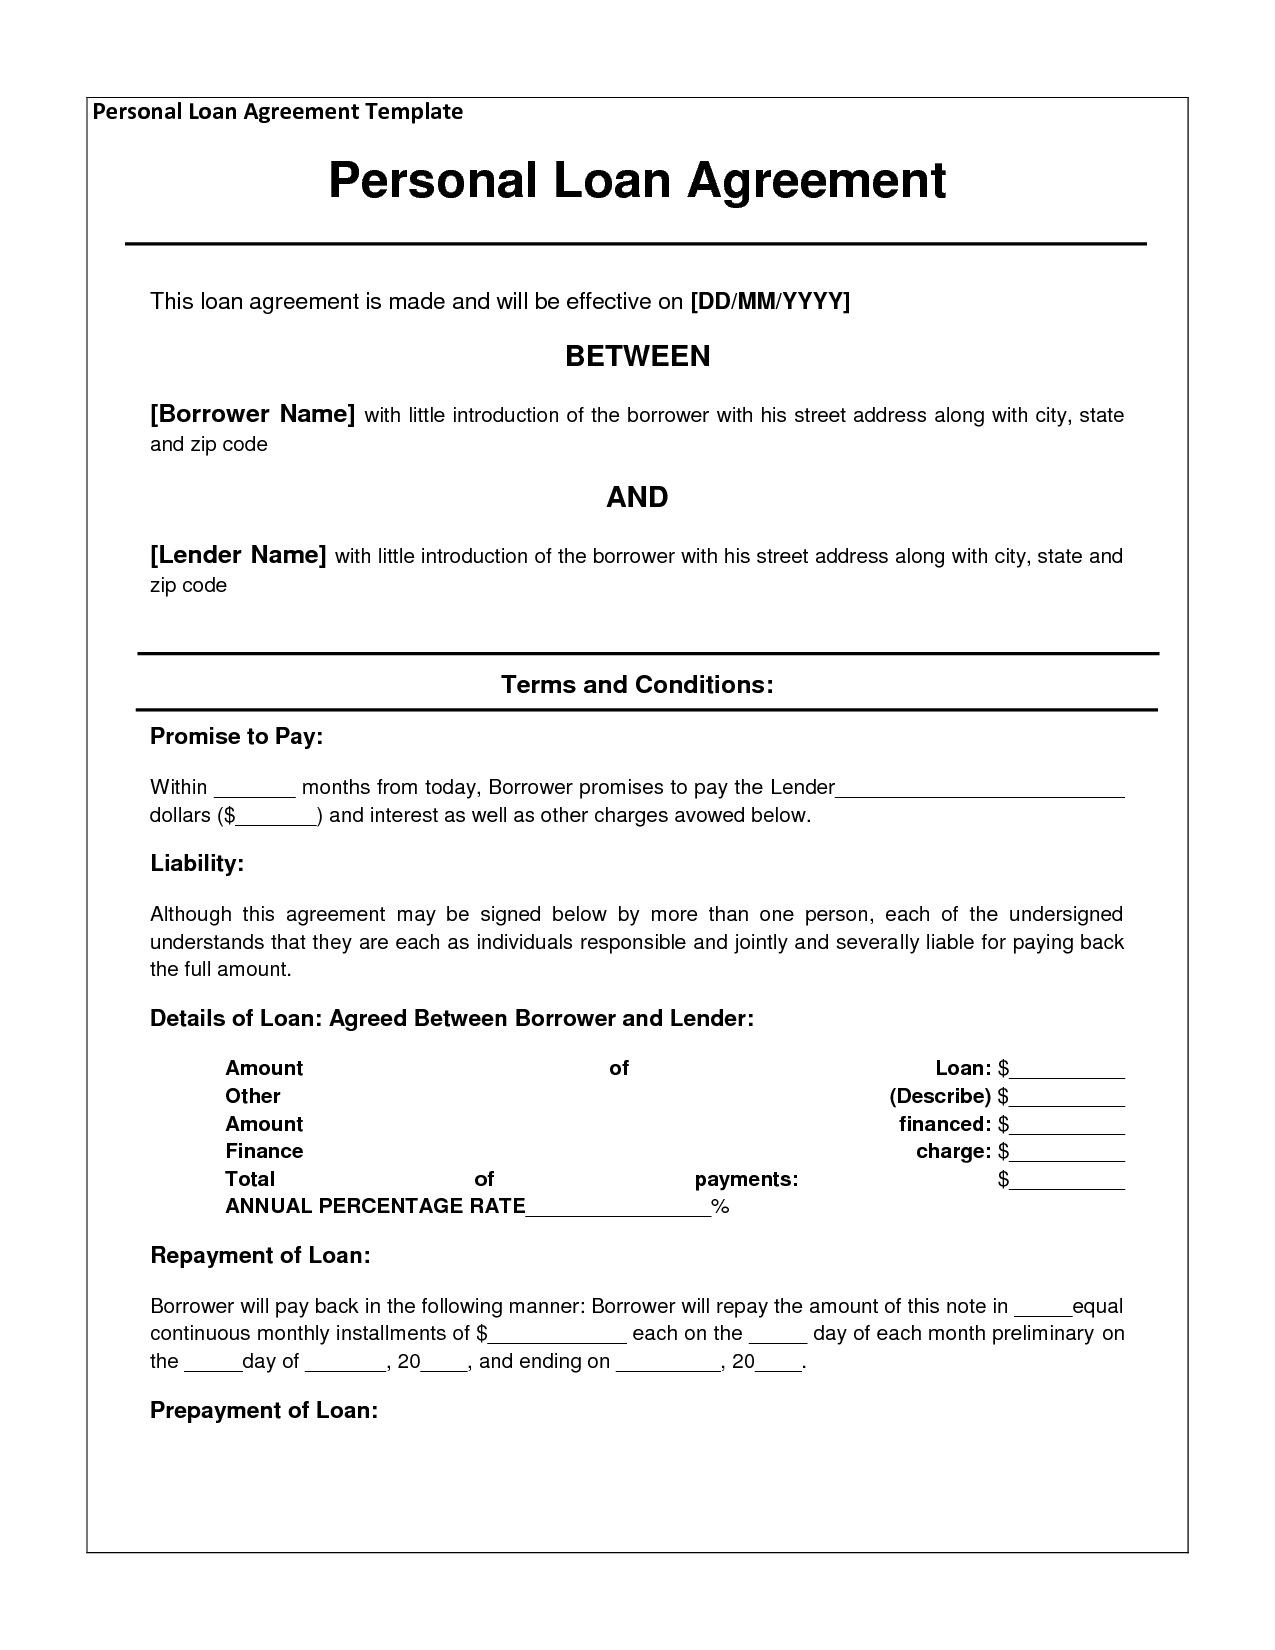 Loan Repayment Letter Template - Free Personal Loan Agreement form Template $1000 Approved In 2